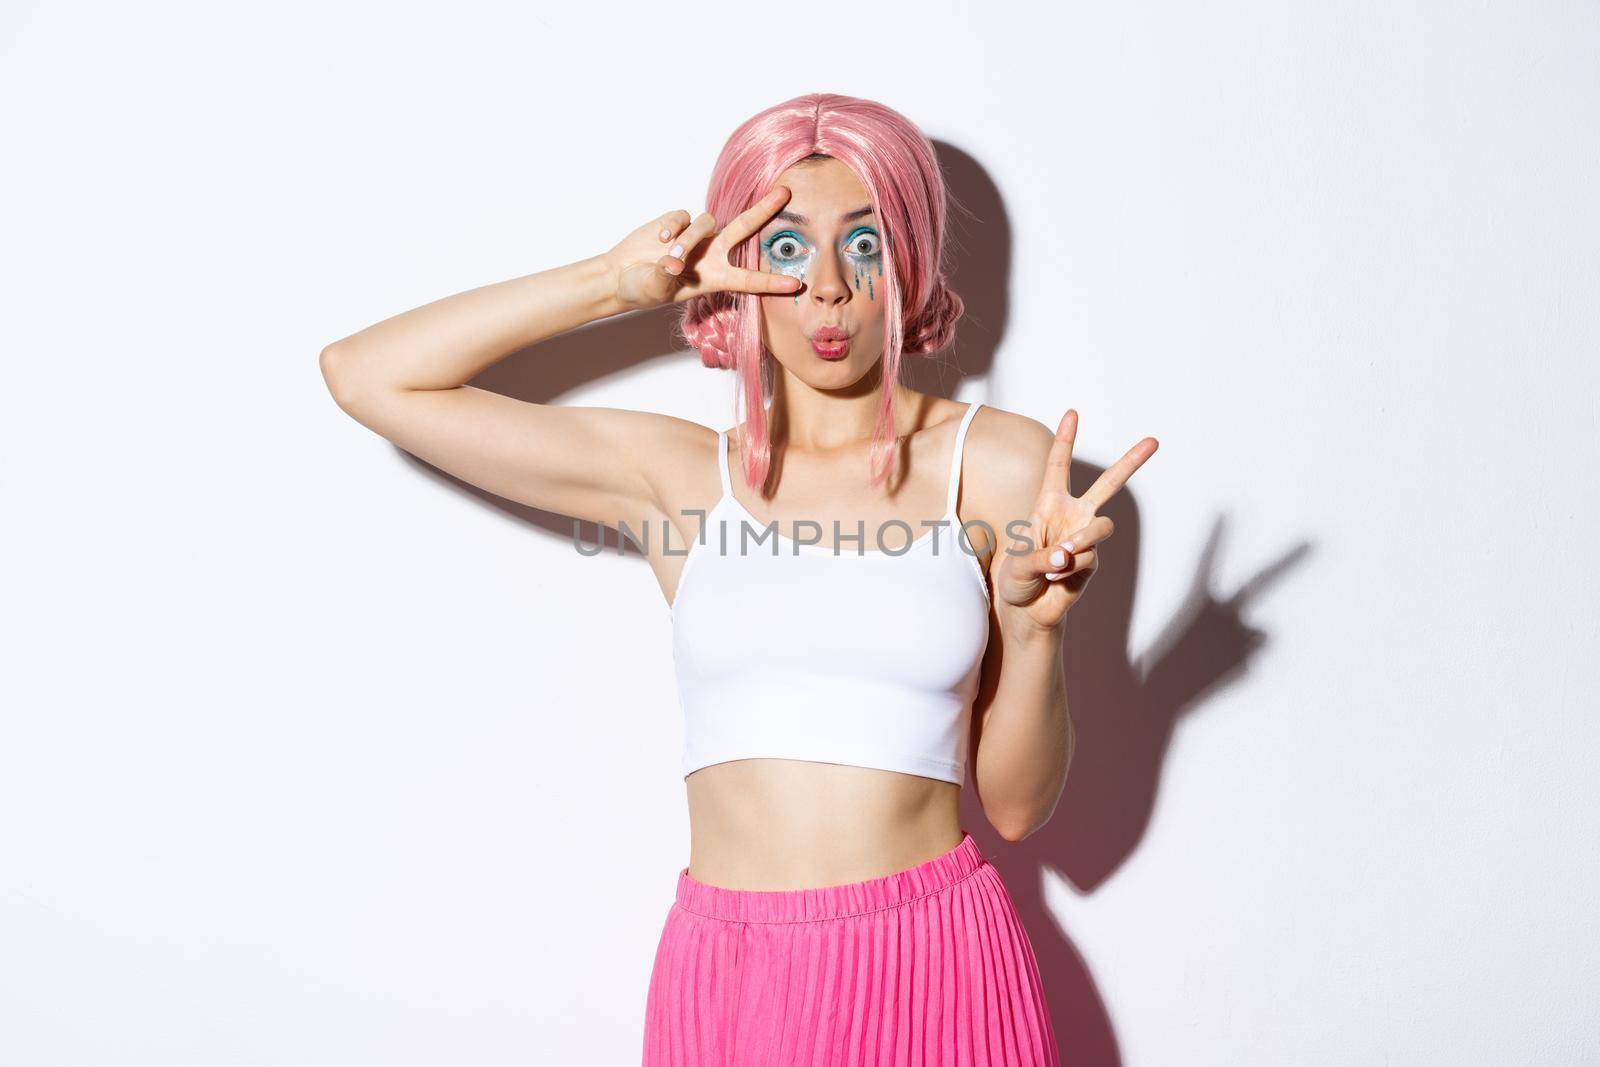 Image of amazed pretty girl with pink anime wig and colorful makeup, showing peace signs, celebrating halloween, standing over white background.